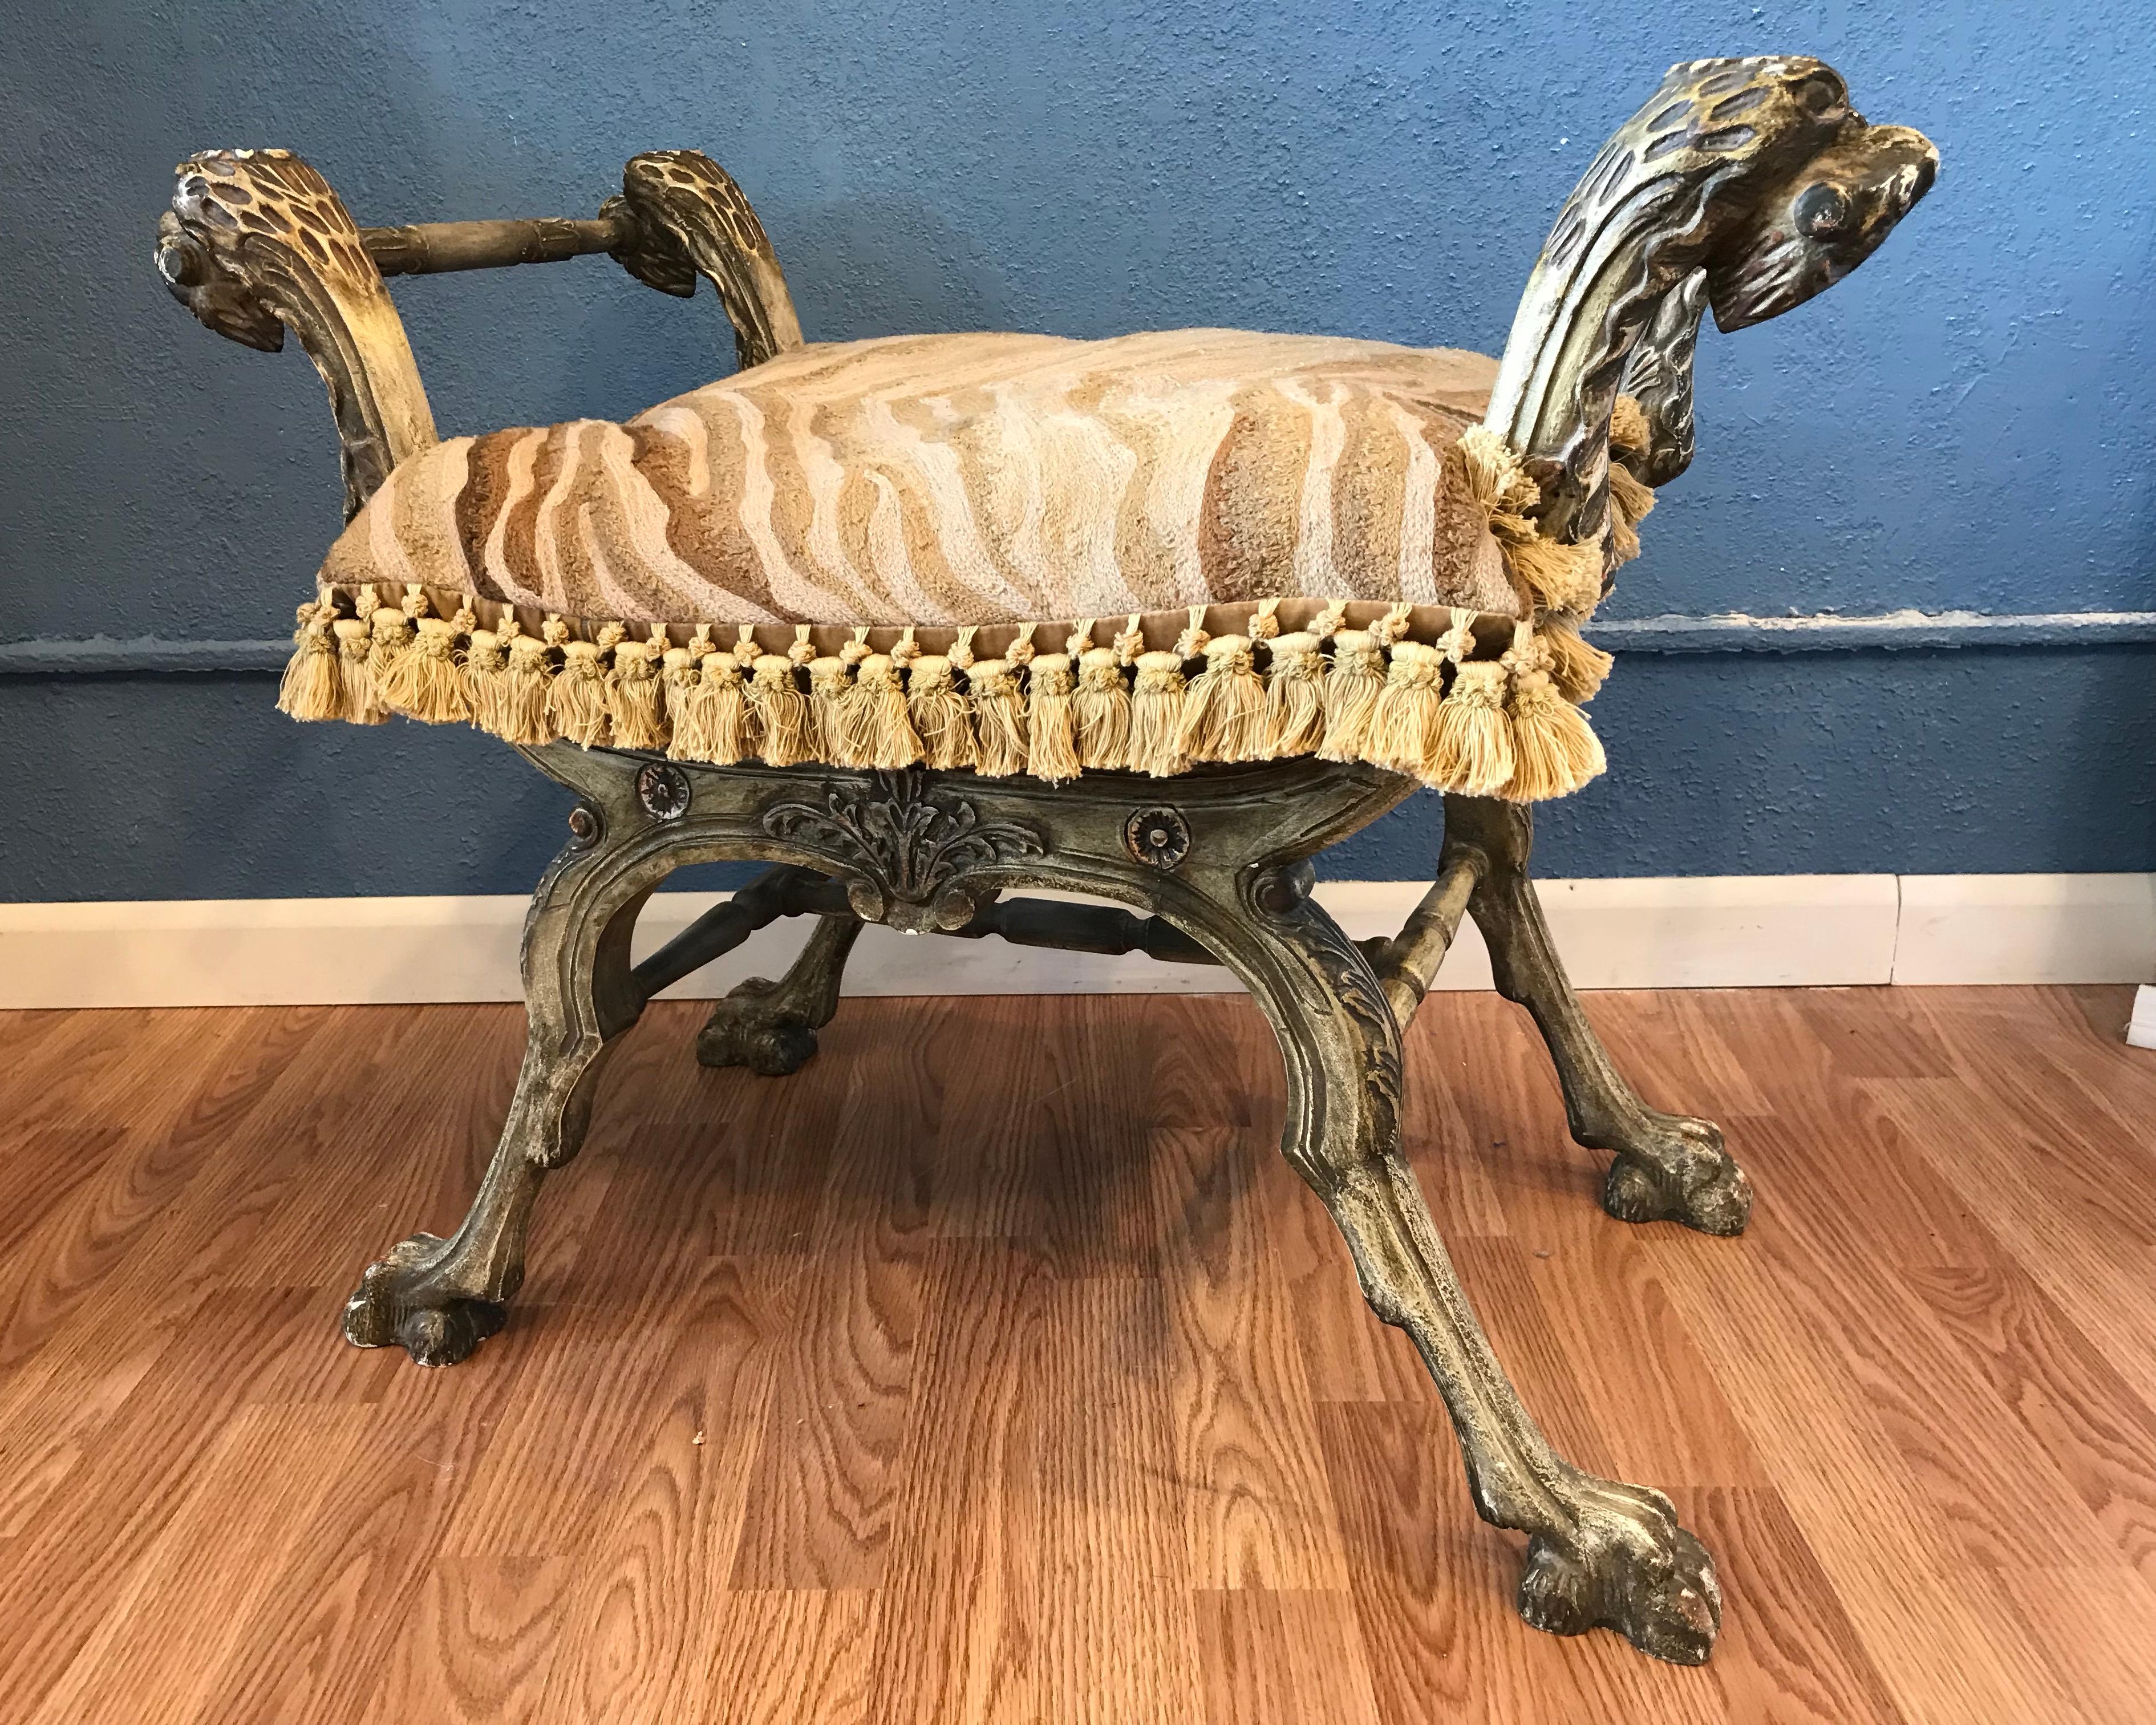 A fanciful vintage bench. It is fashioned with griffin - like heads at each corner.
The sharply carved bench terminates with 